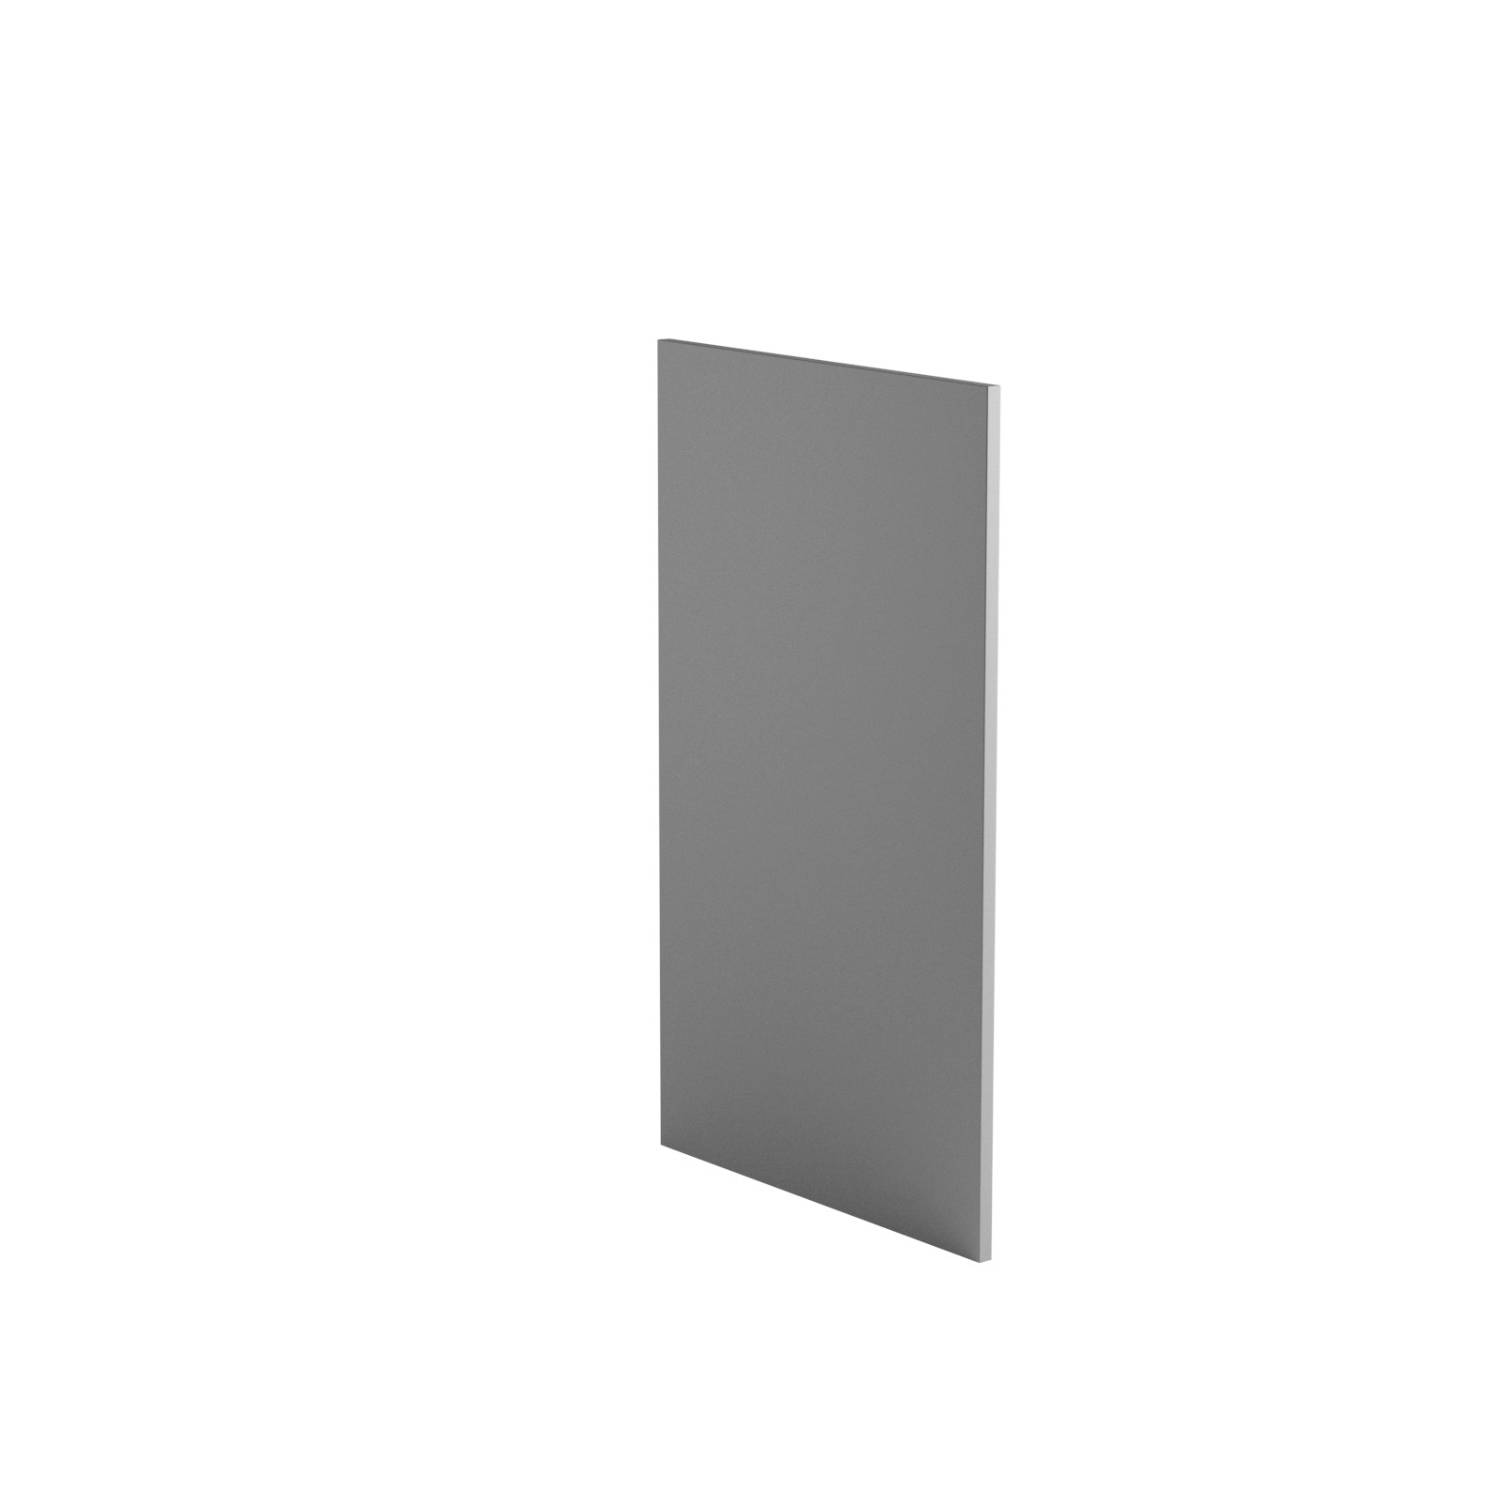 Qube Fitted Base Cladding Panel - Cladding Panel